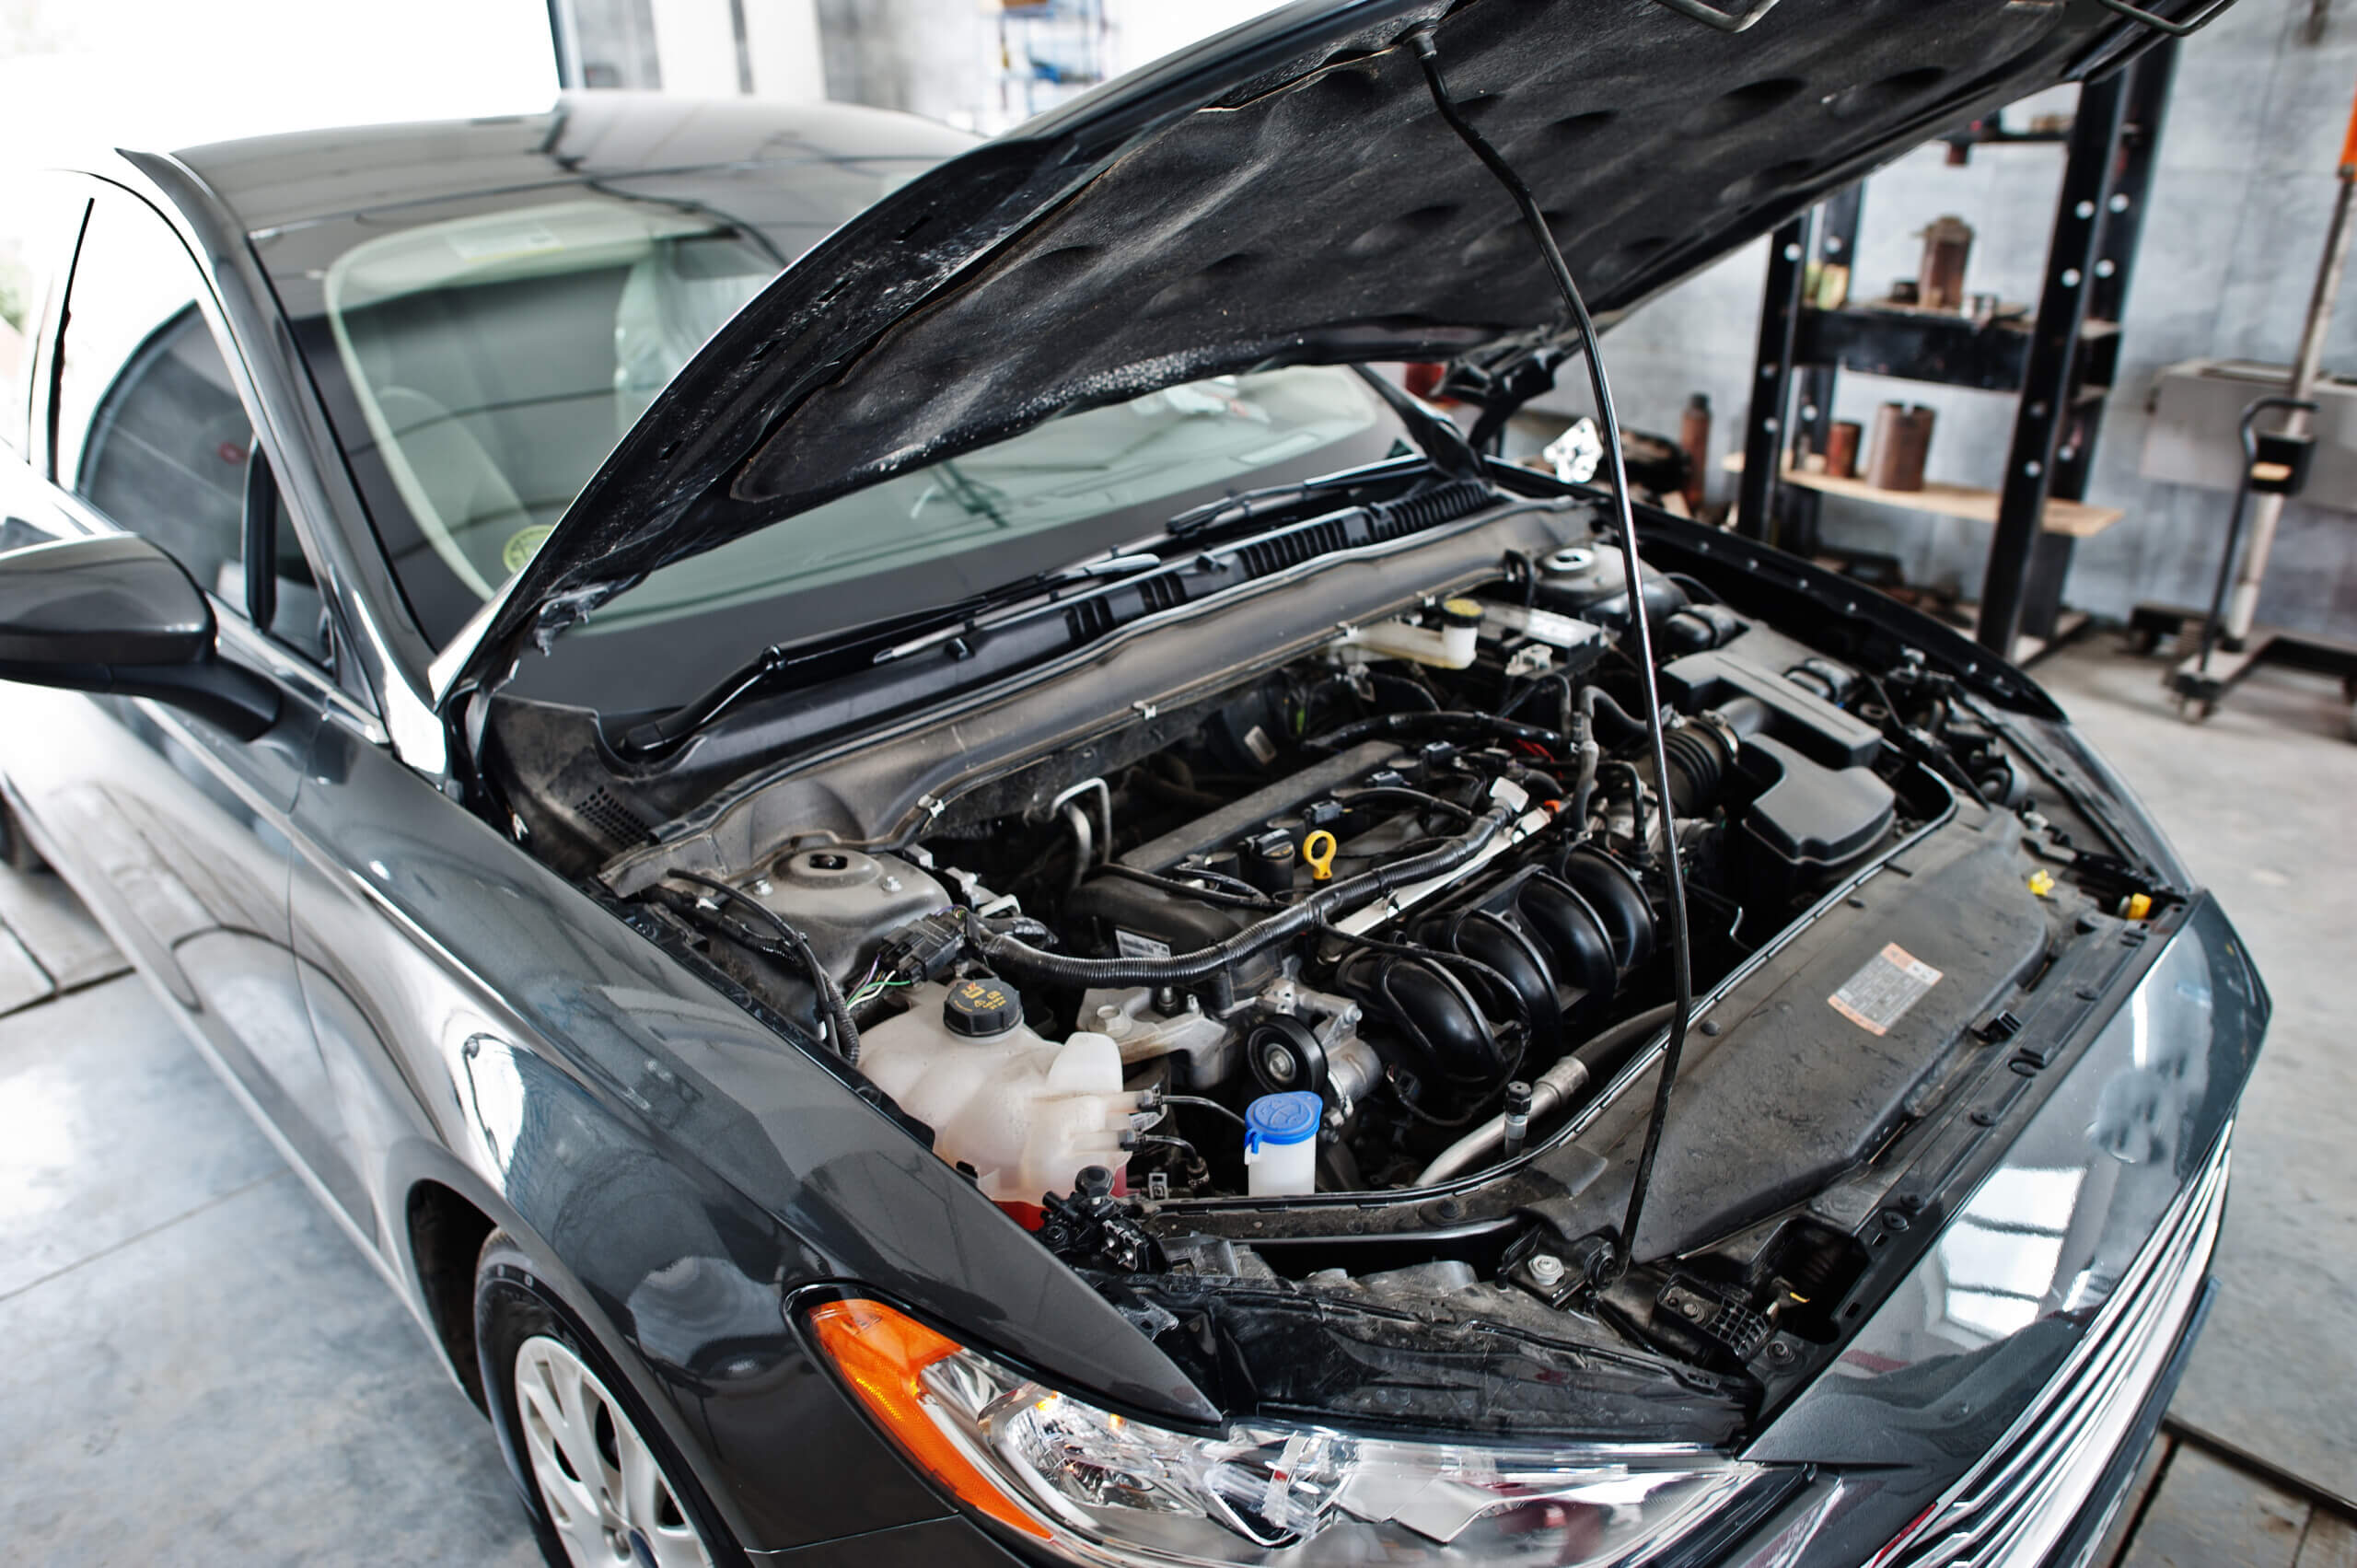 Hidden functions of a car engine cover that you didn’t even know about